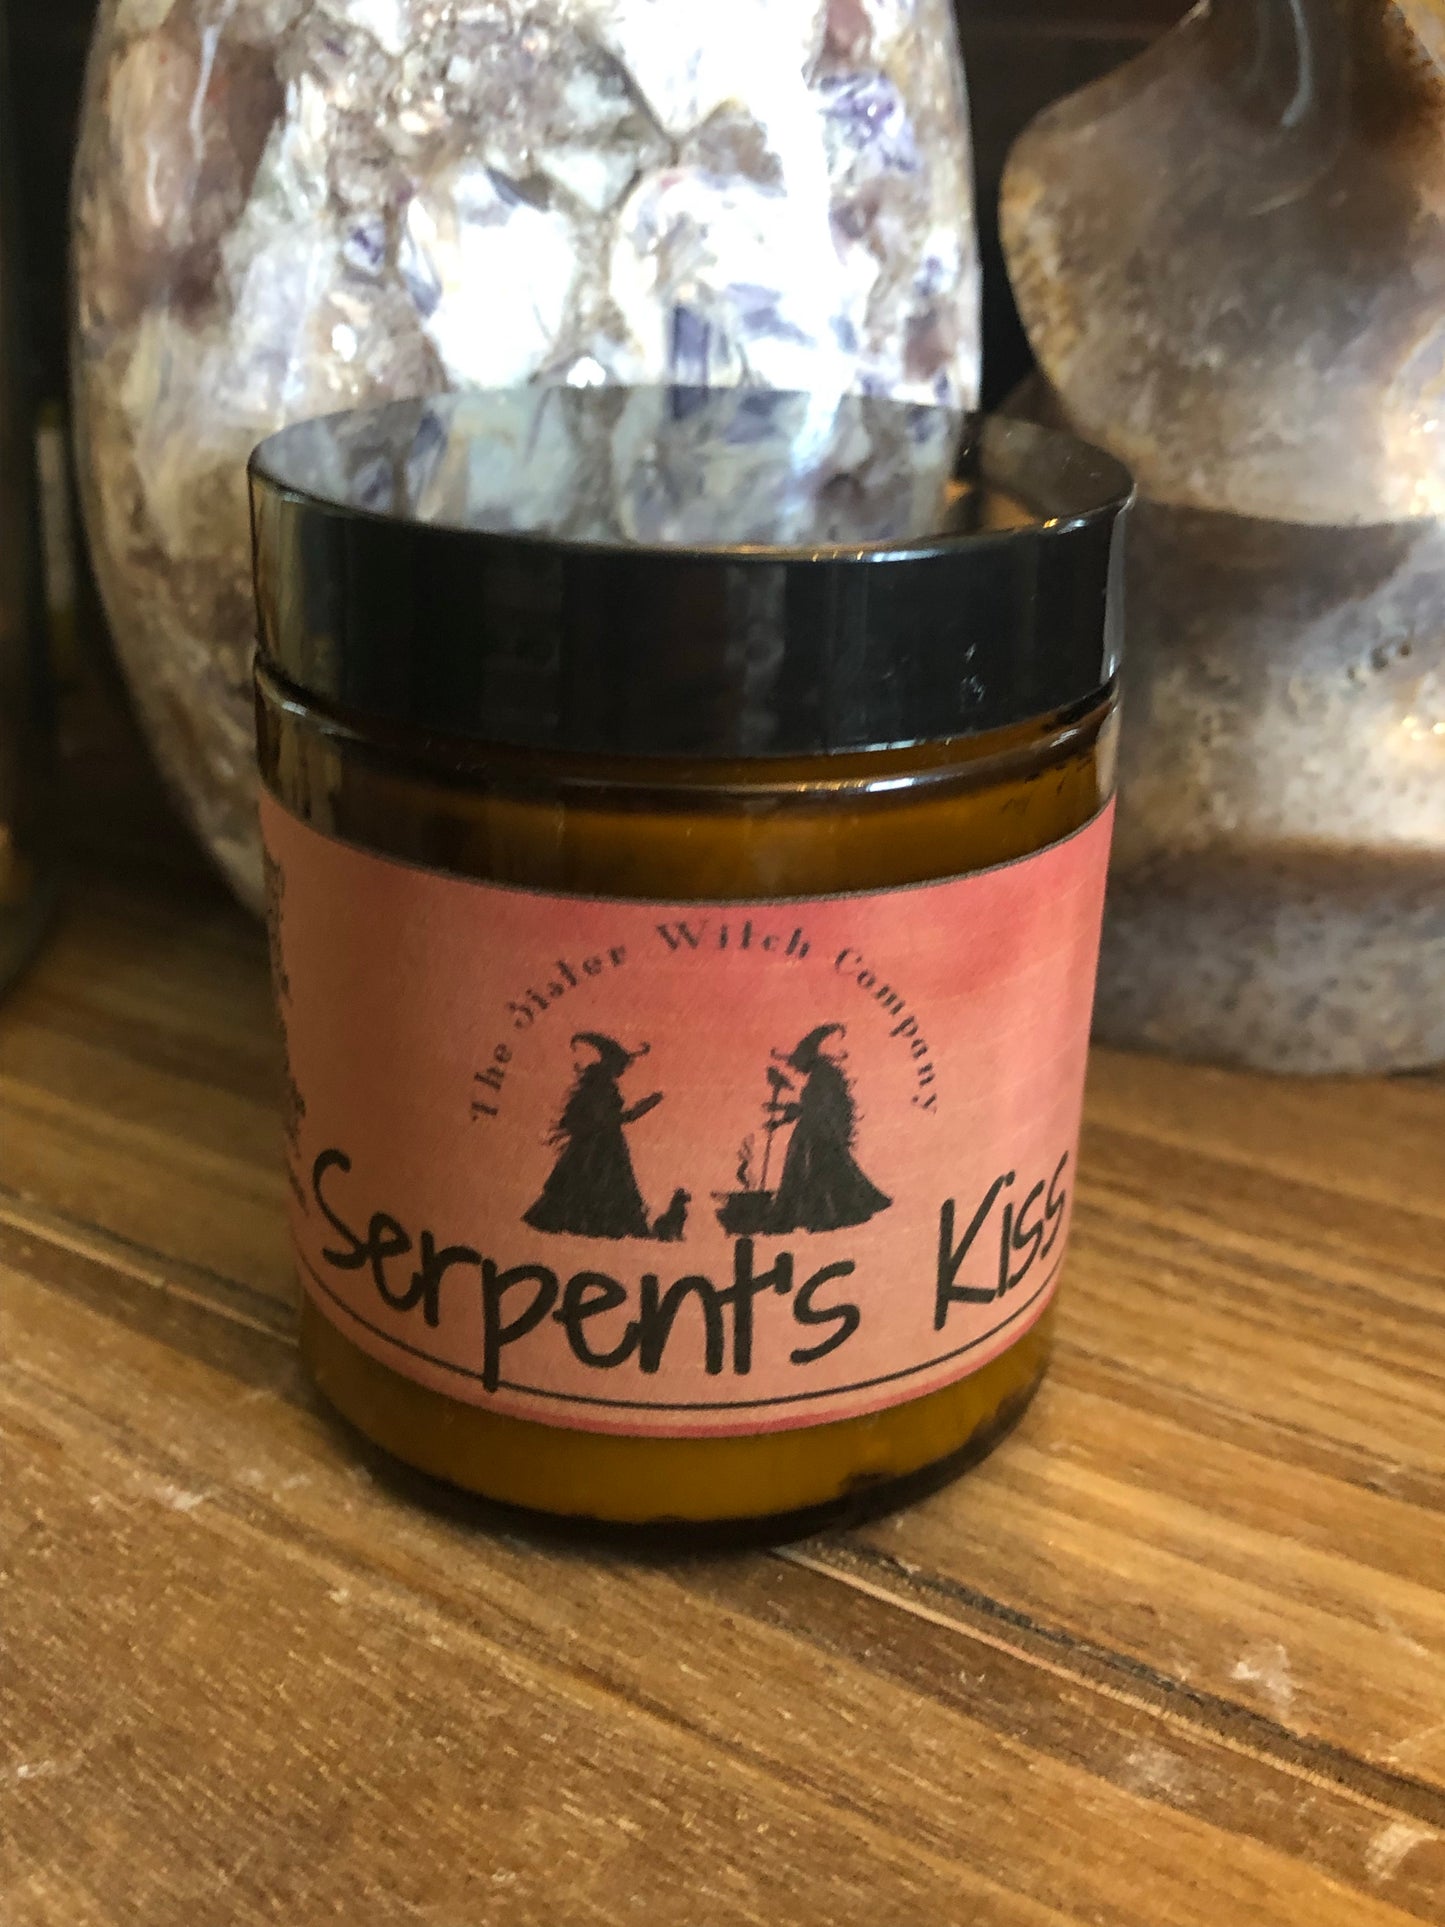 Serpents Kiss Product Line